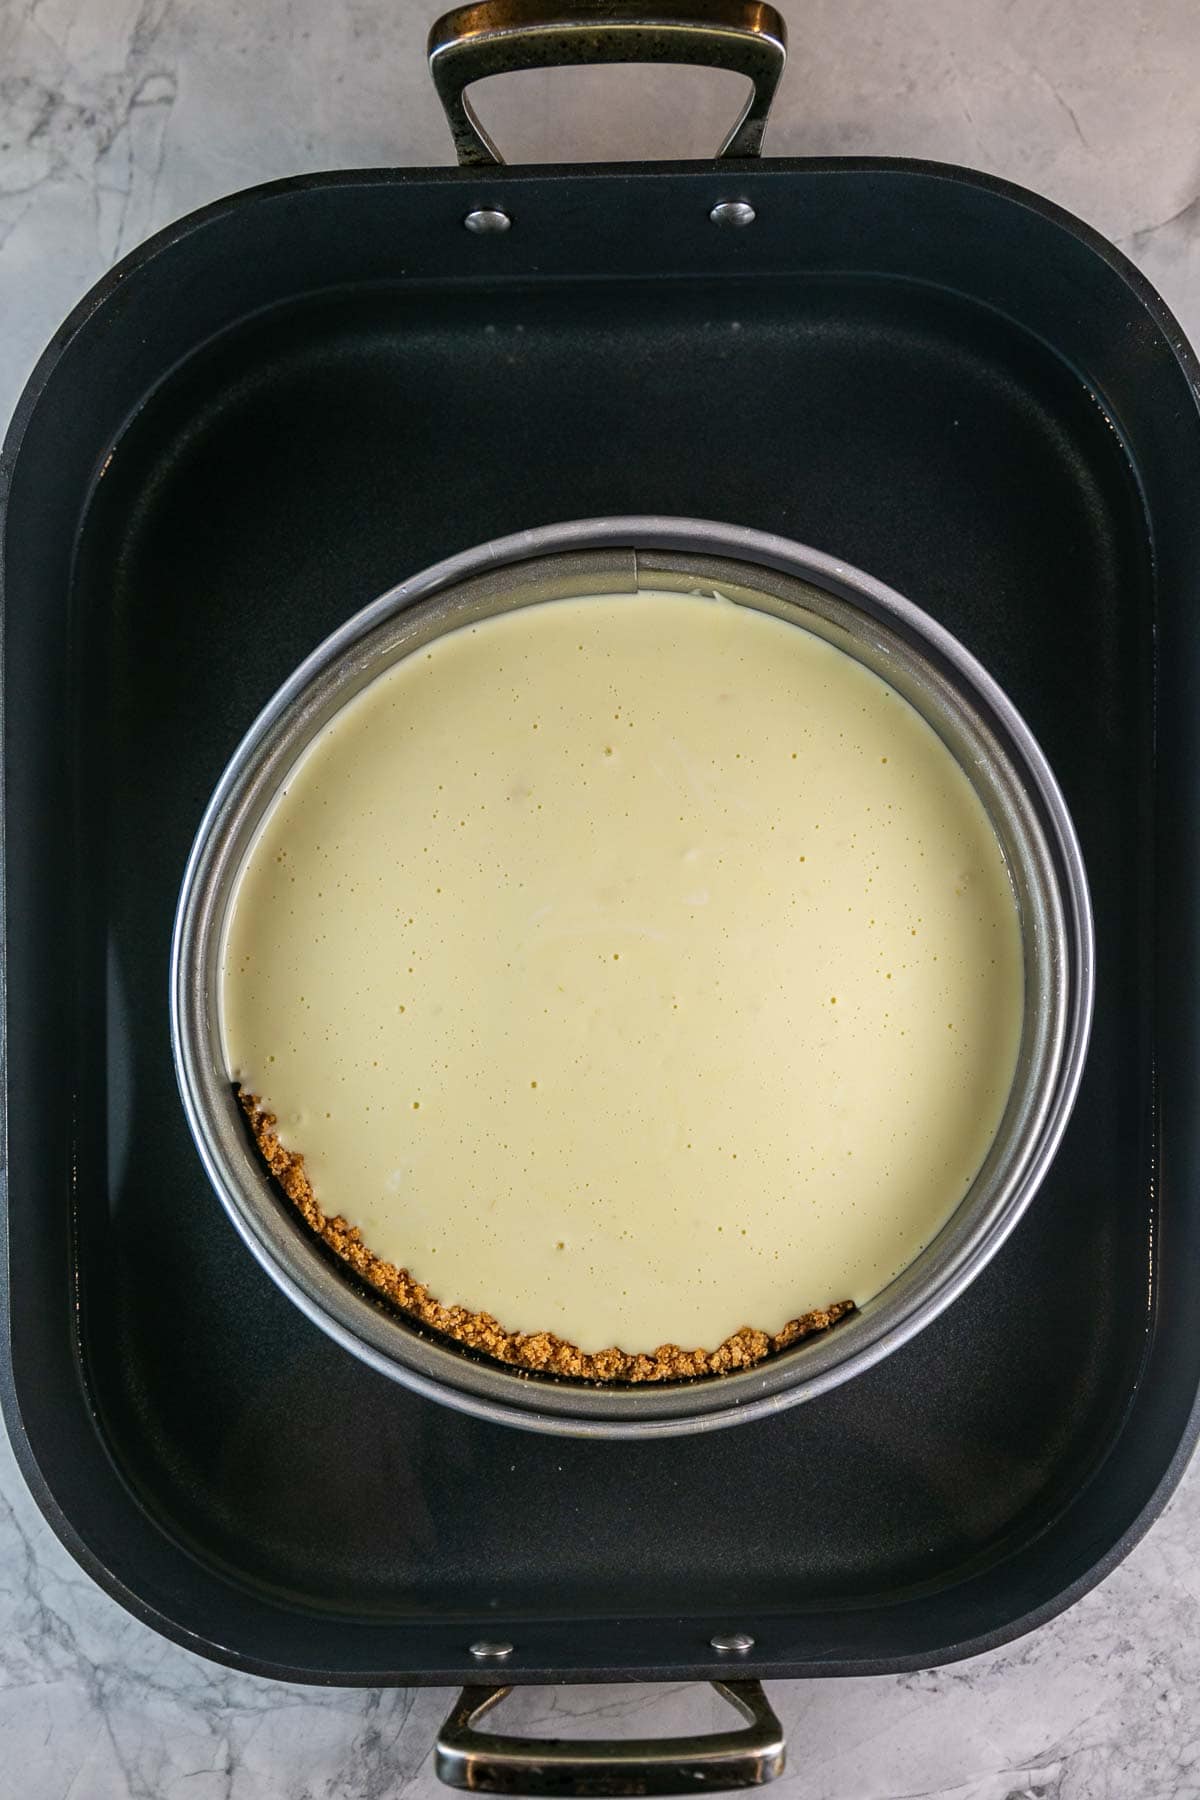 Unbaked cheesecake in a water bath before going into the oven.